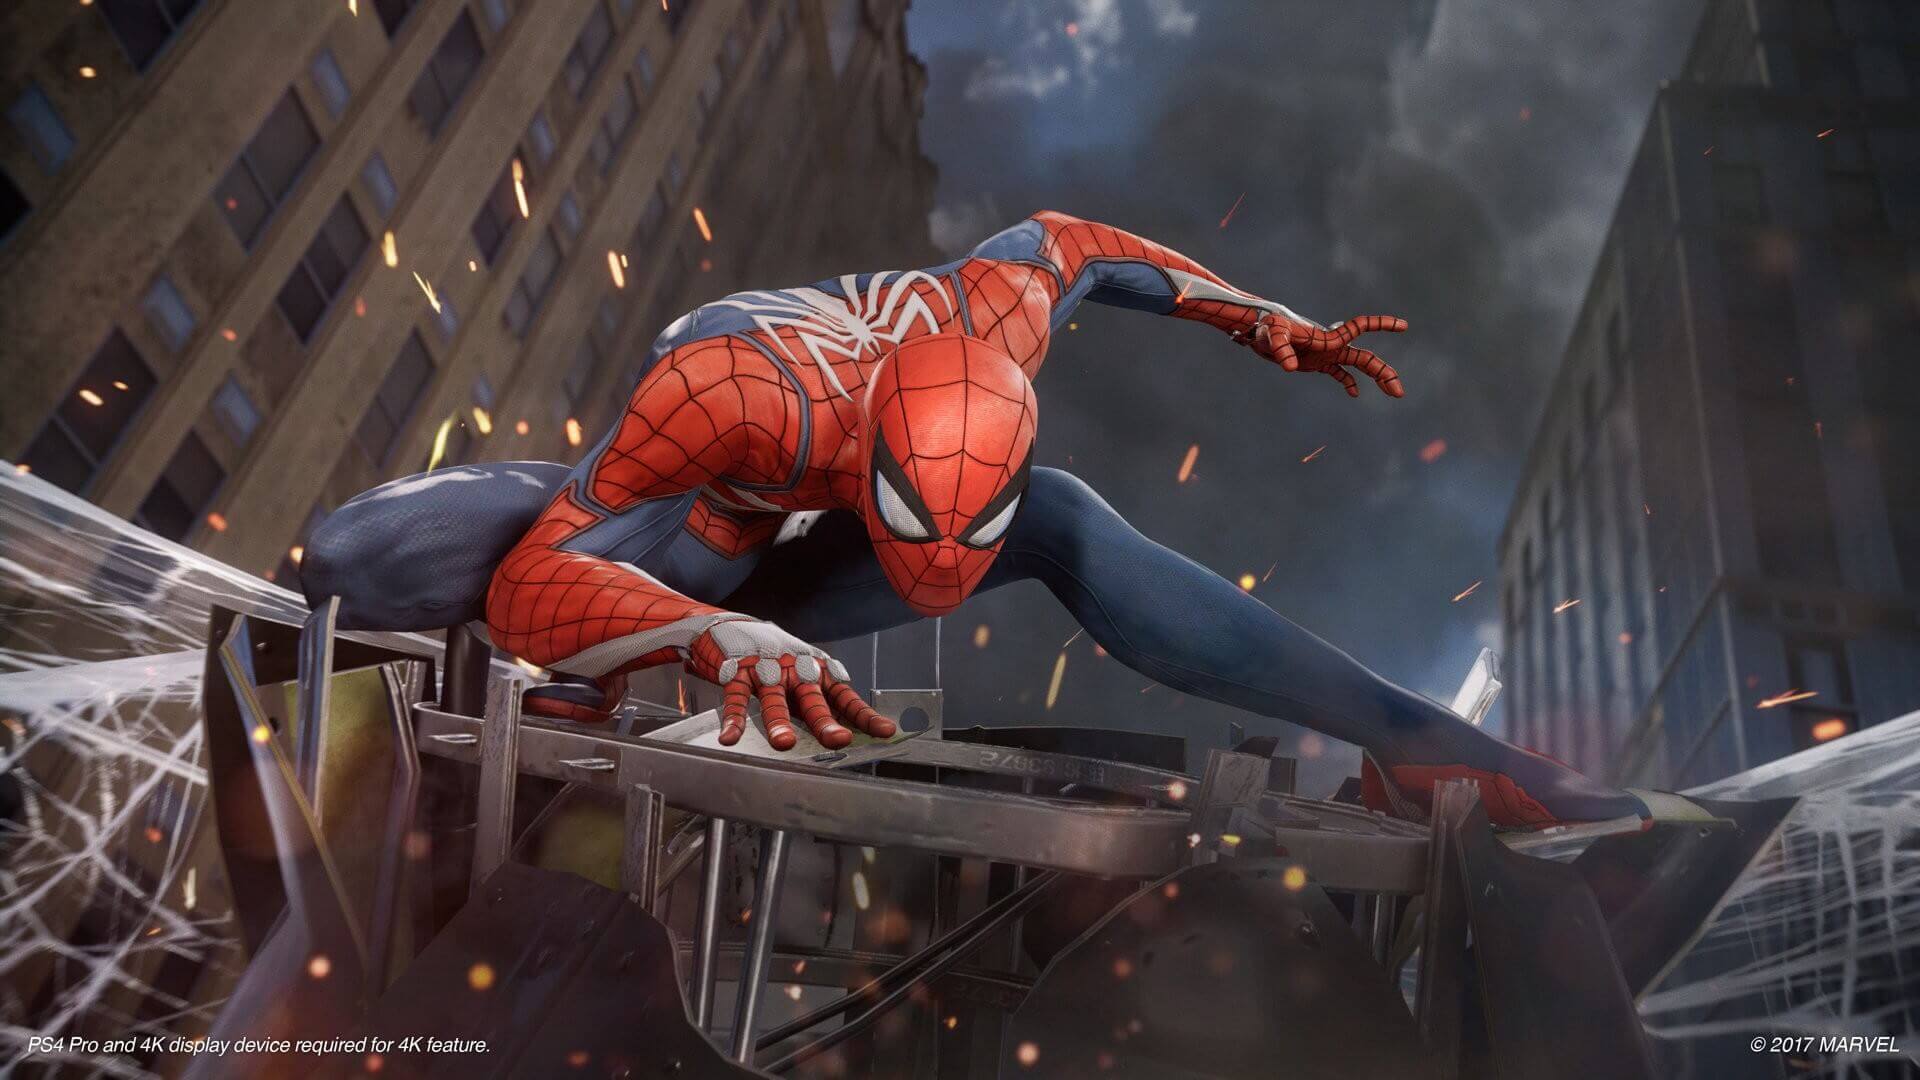 Marvel's Spider-Man: Game of The Year Edition